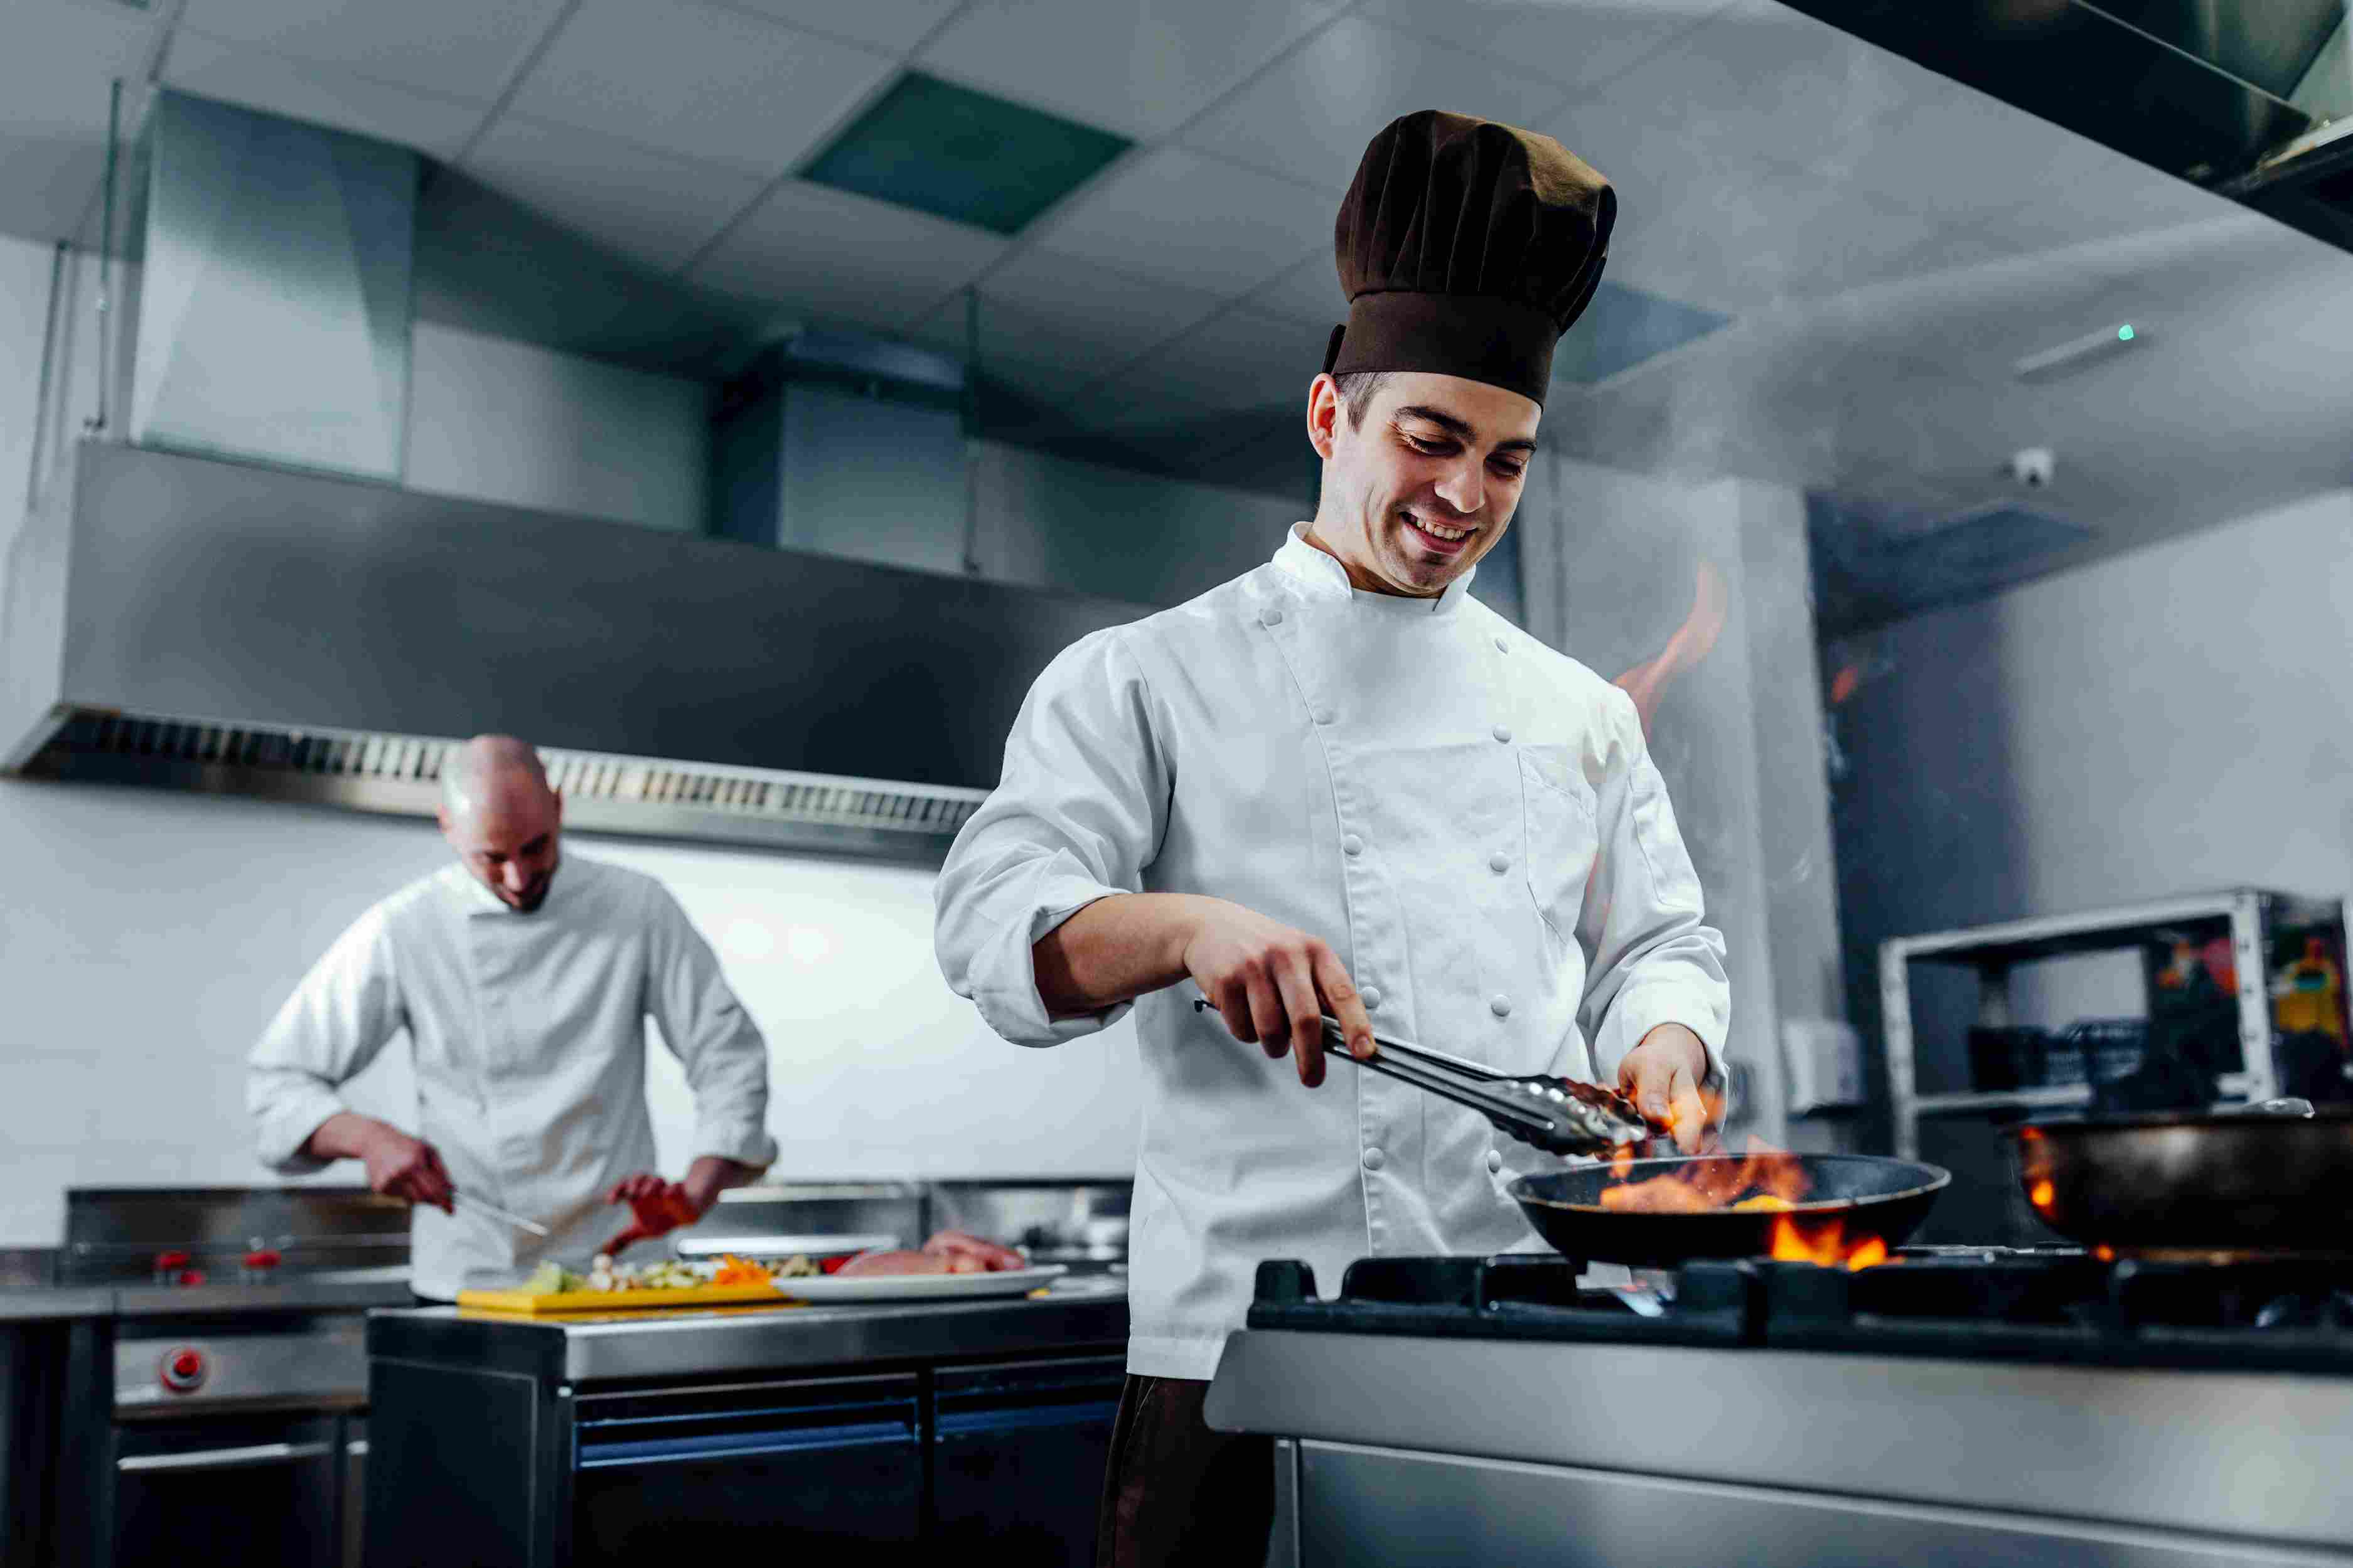 Cloud kitchen is one of the food service industry trends